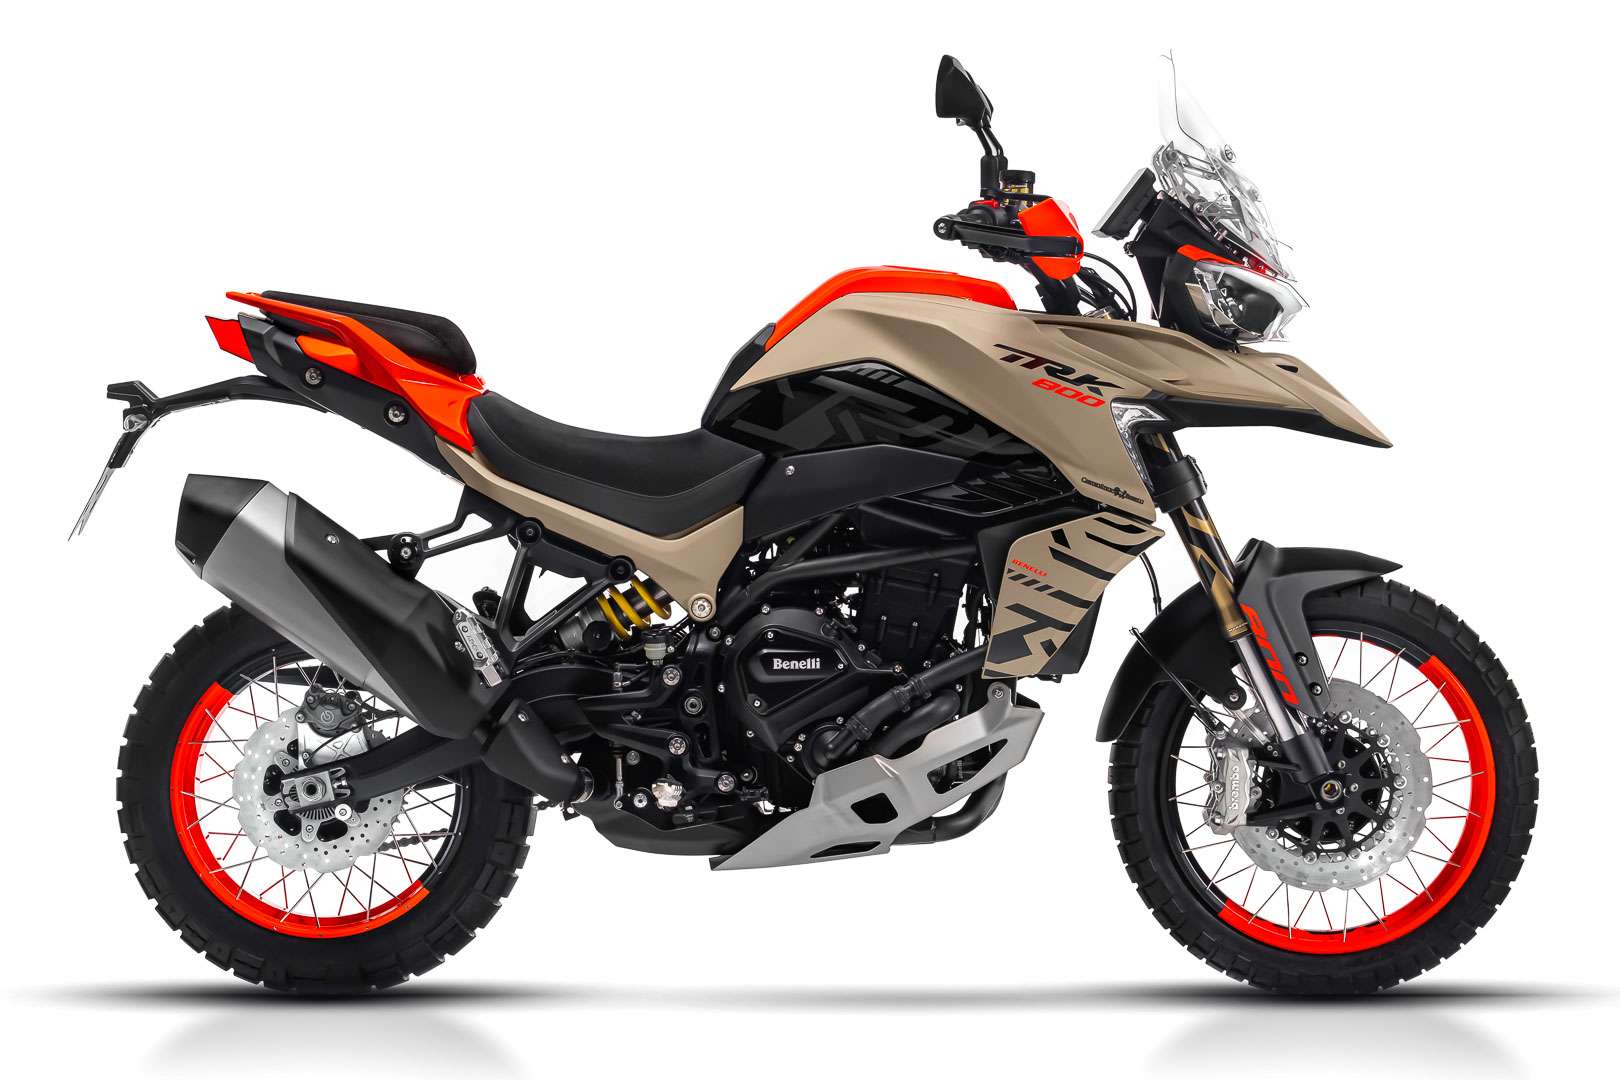 2022-benelli-trk-800-first-look-adventure-sport-touring-motorcycle-11